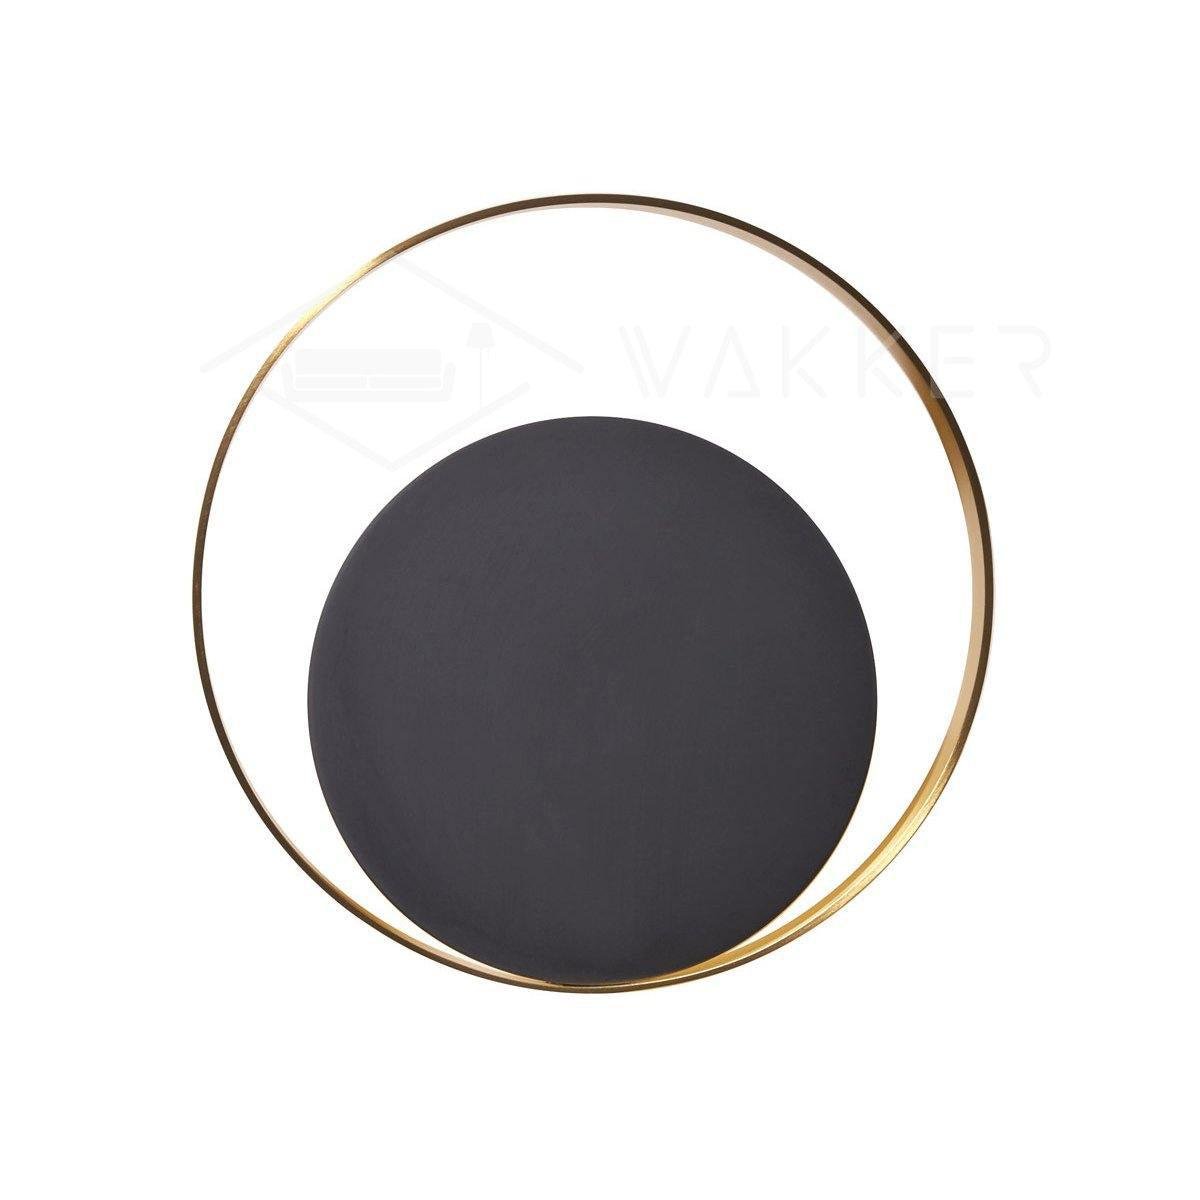 Black and Gold Circle Wall Lamp, 26cm Diameter x 2, Height 26cm